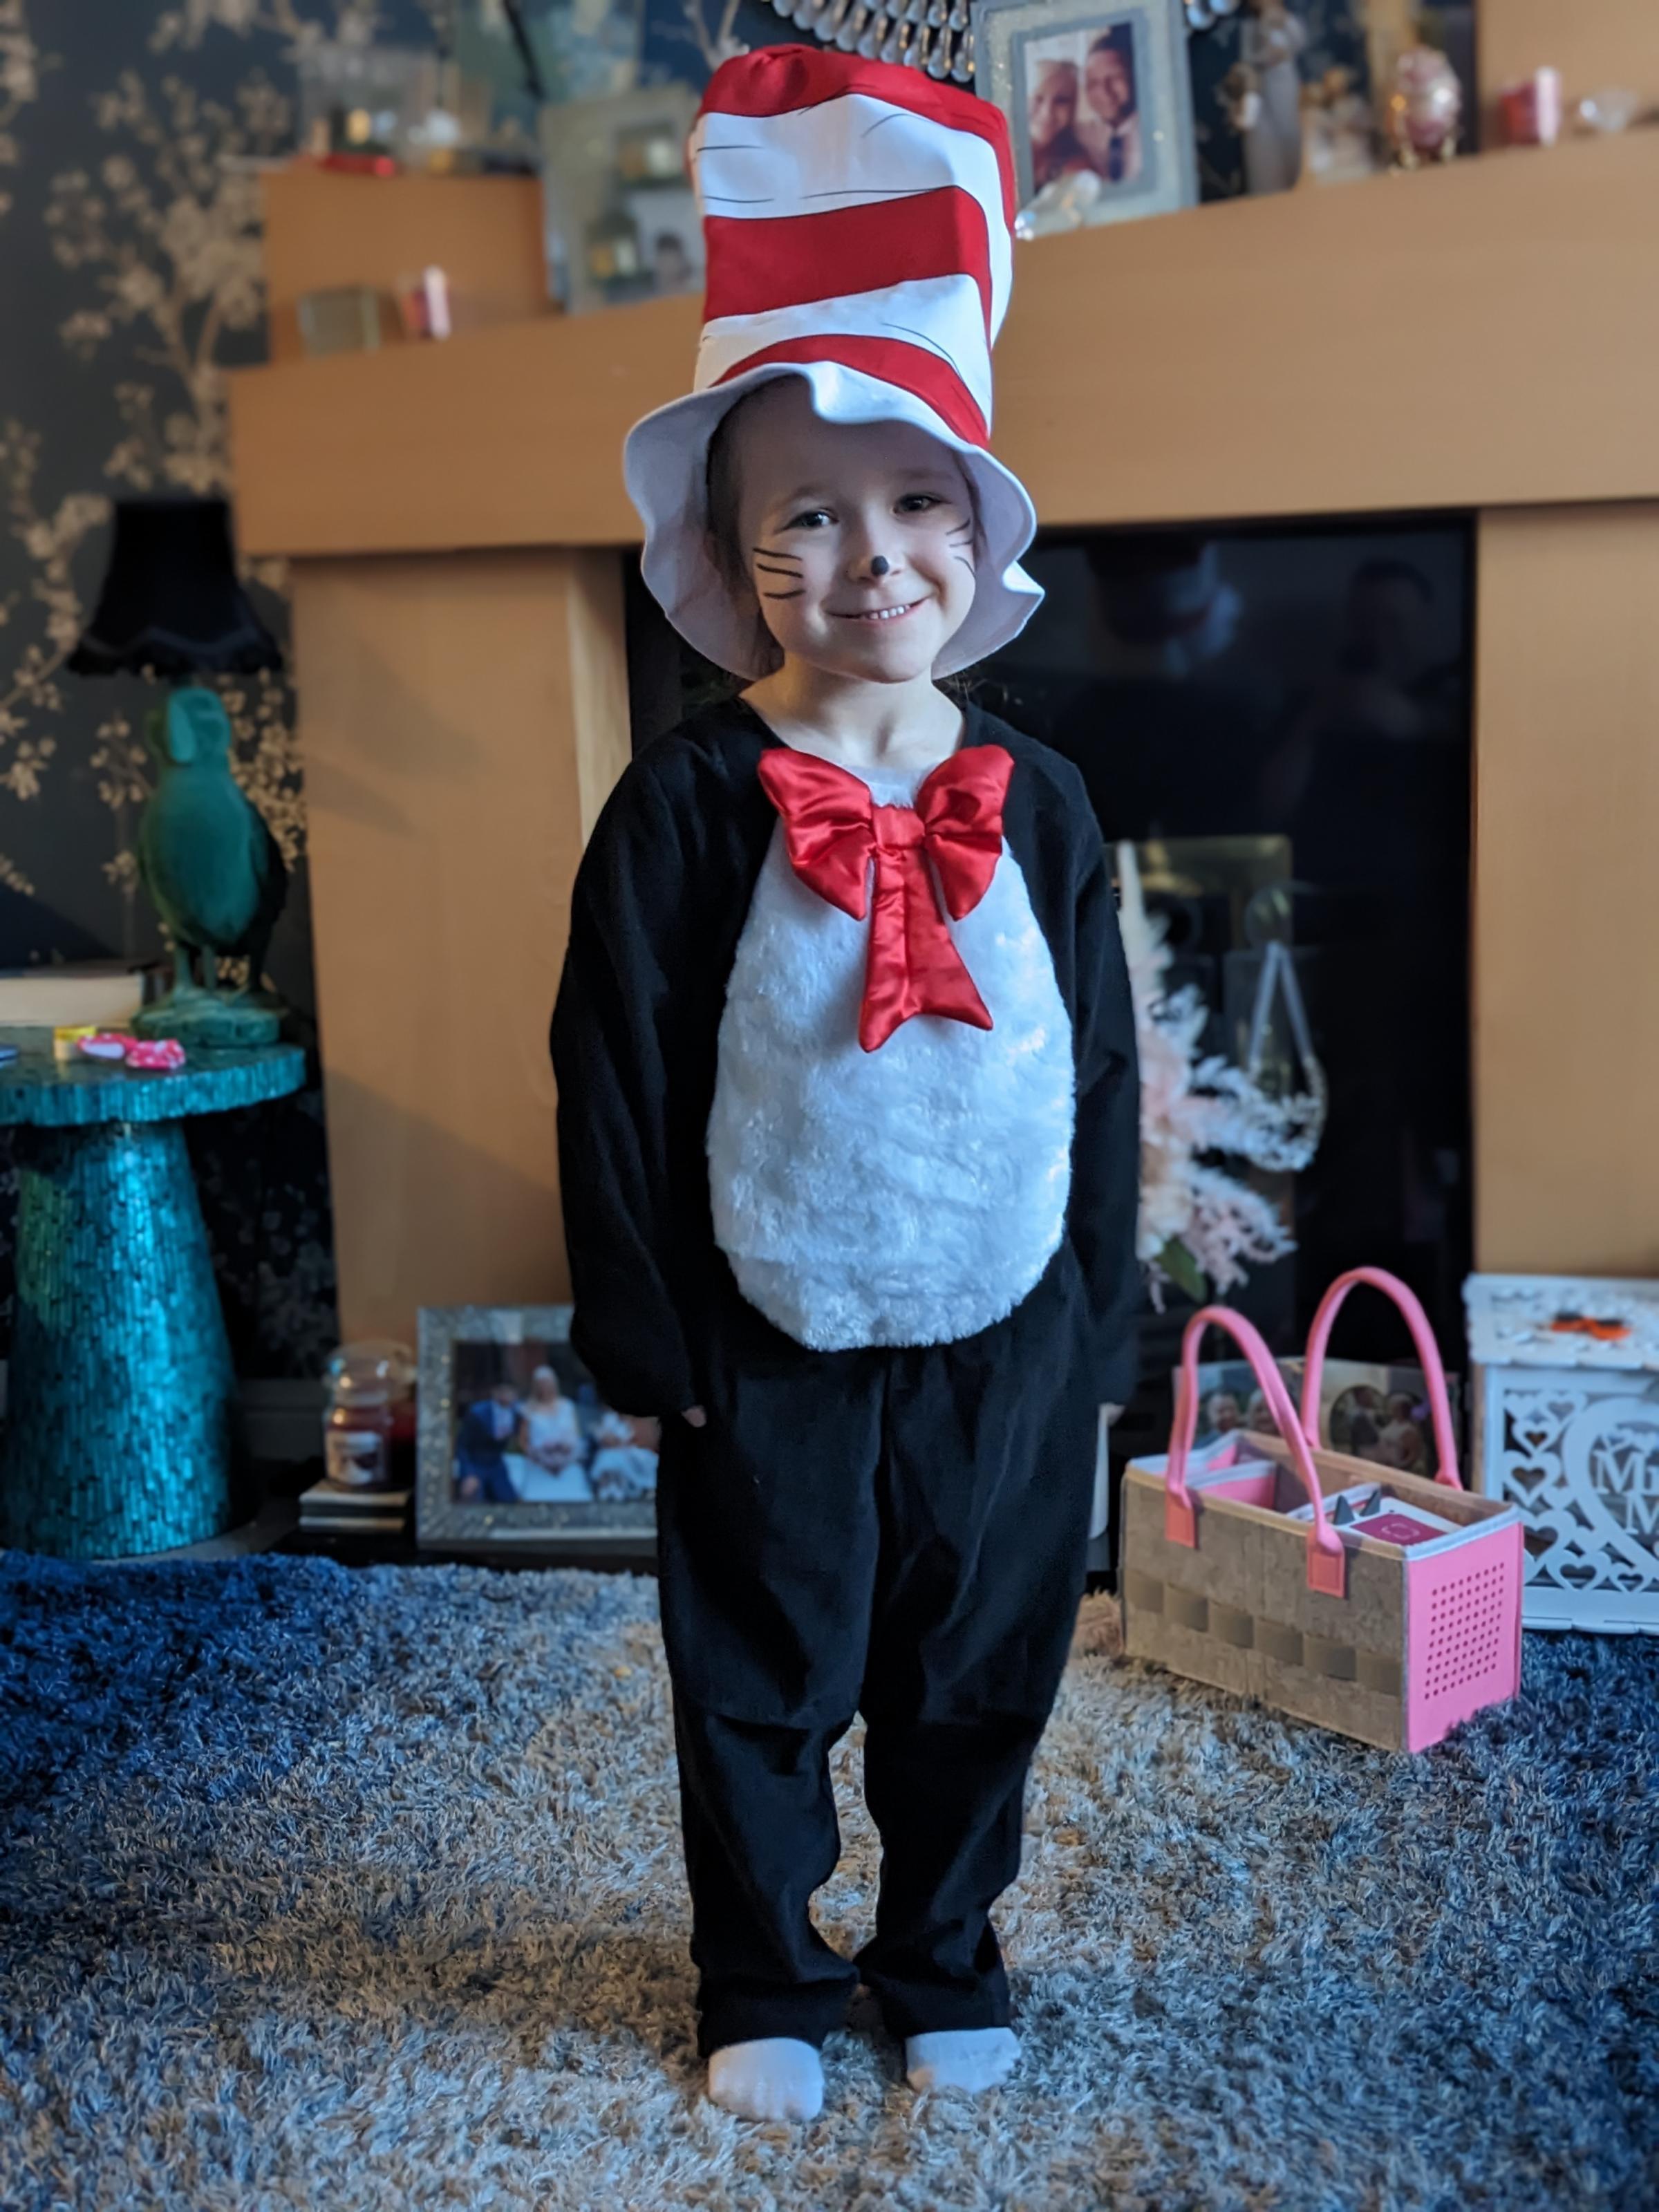 Evie Leicester as The Cat in the Hat